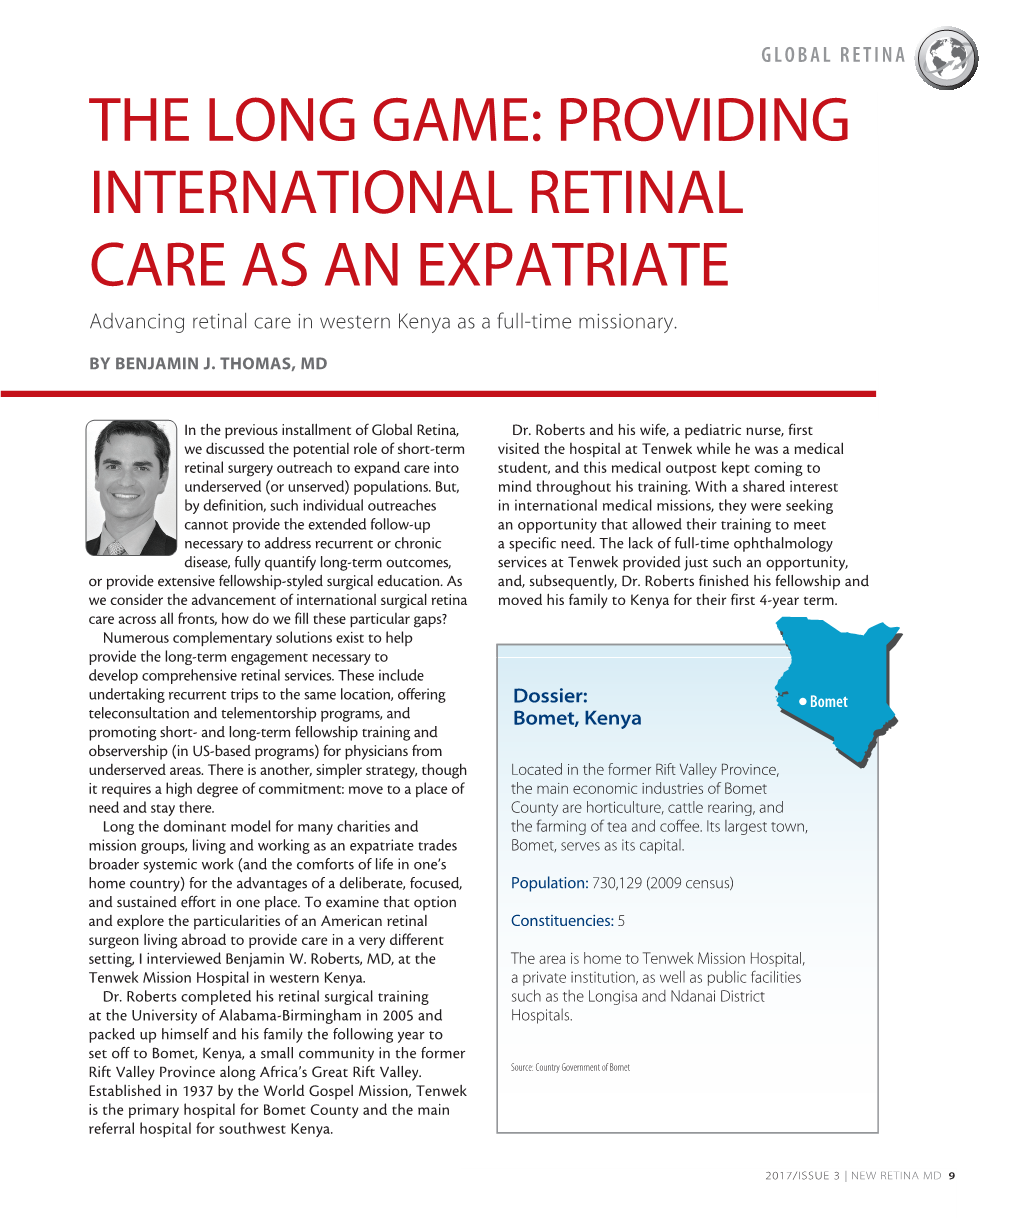 PROVIDING INTERNATIONAL RETINAL CARE AS an EXPATRIATE Advancing Retinal Care in Western Kenya As a Full-Time Missionary